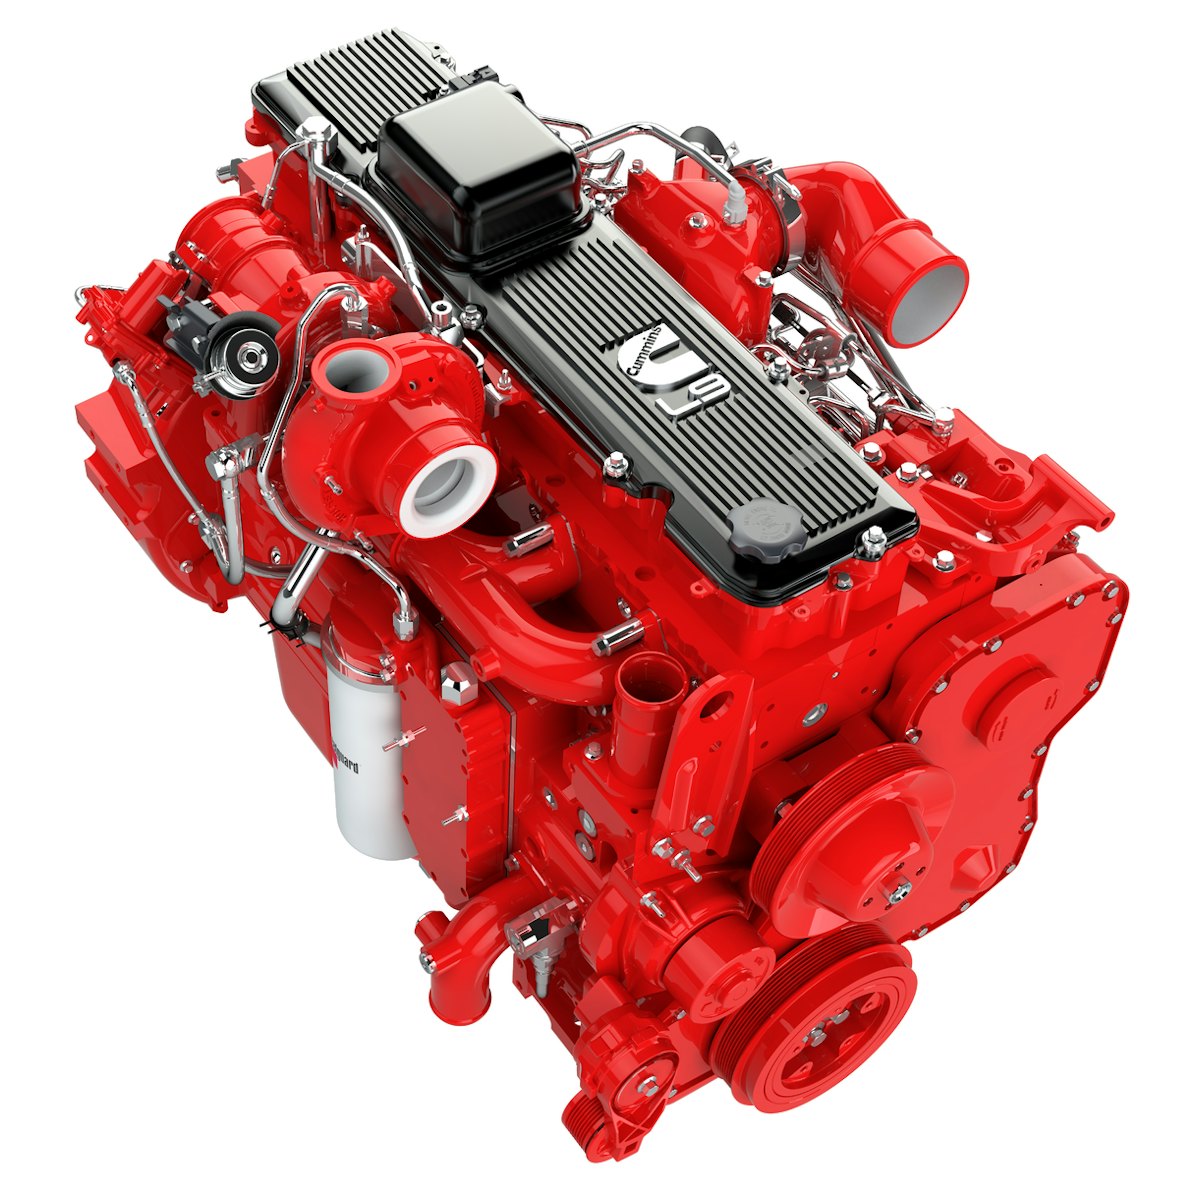 Cummins B6.7 and L9 Stage V Diesel Engines From Cummins Inc. For